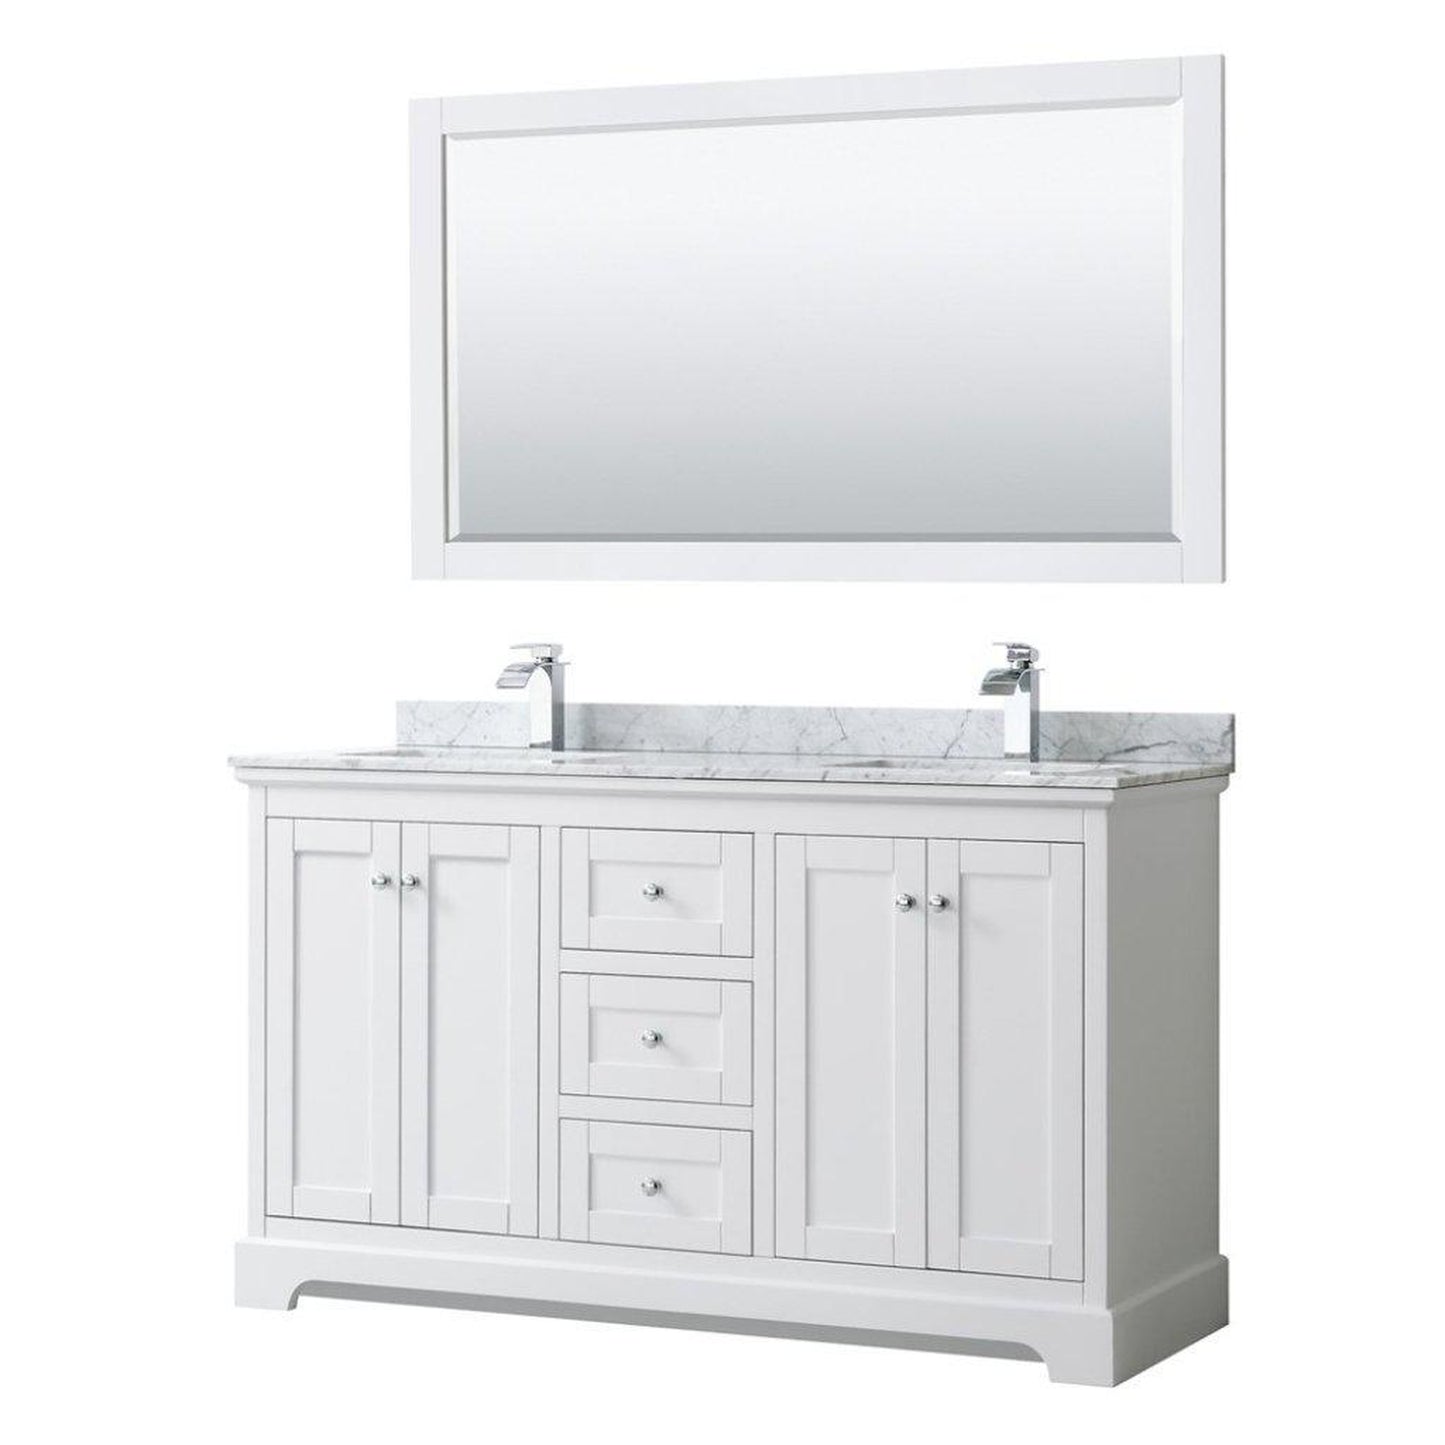 Wyndham Collection Avery 60" White Double Bathroom Vanity Set, White Carrara Marble Countertop With 1-Hole Faucet, Square Sink, 58" Mirror, Polished Chrome Trims